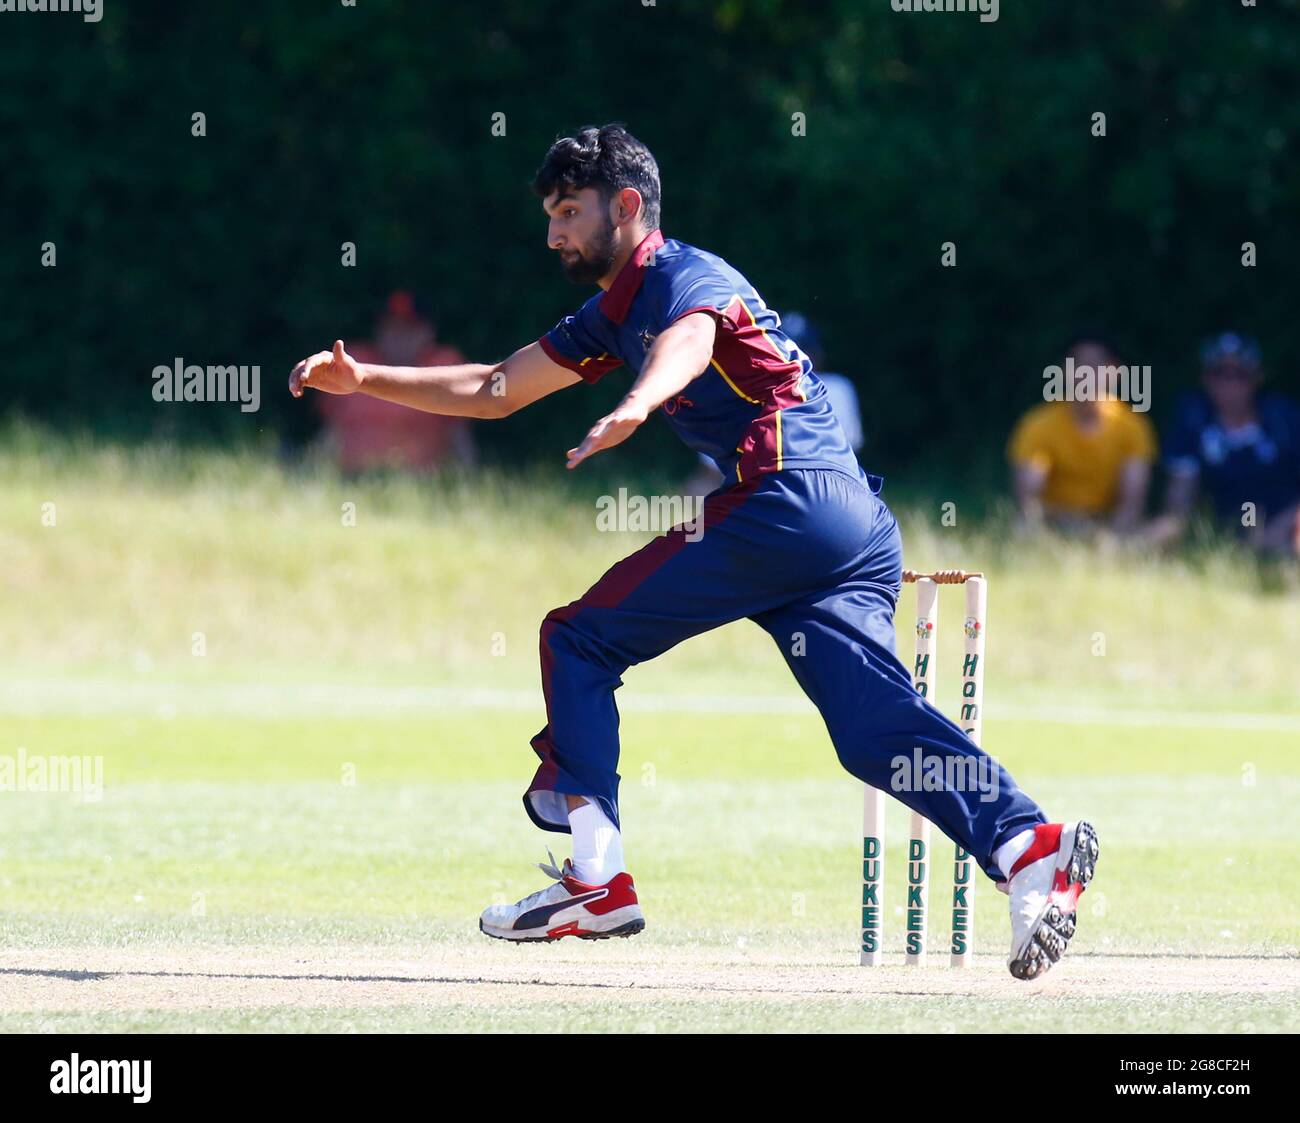 BILLERICAY, United Kingdom, JULY 18: Naivedy Dwivedi of Wanstead cc during    Dukes Essex T20 Competition - Final between Wanstead and Snaresbrook CC Stock Photo